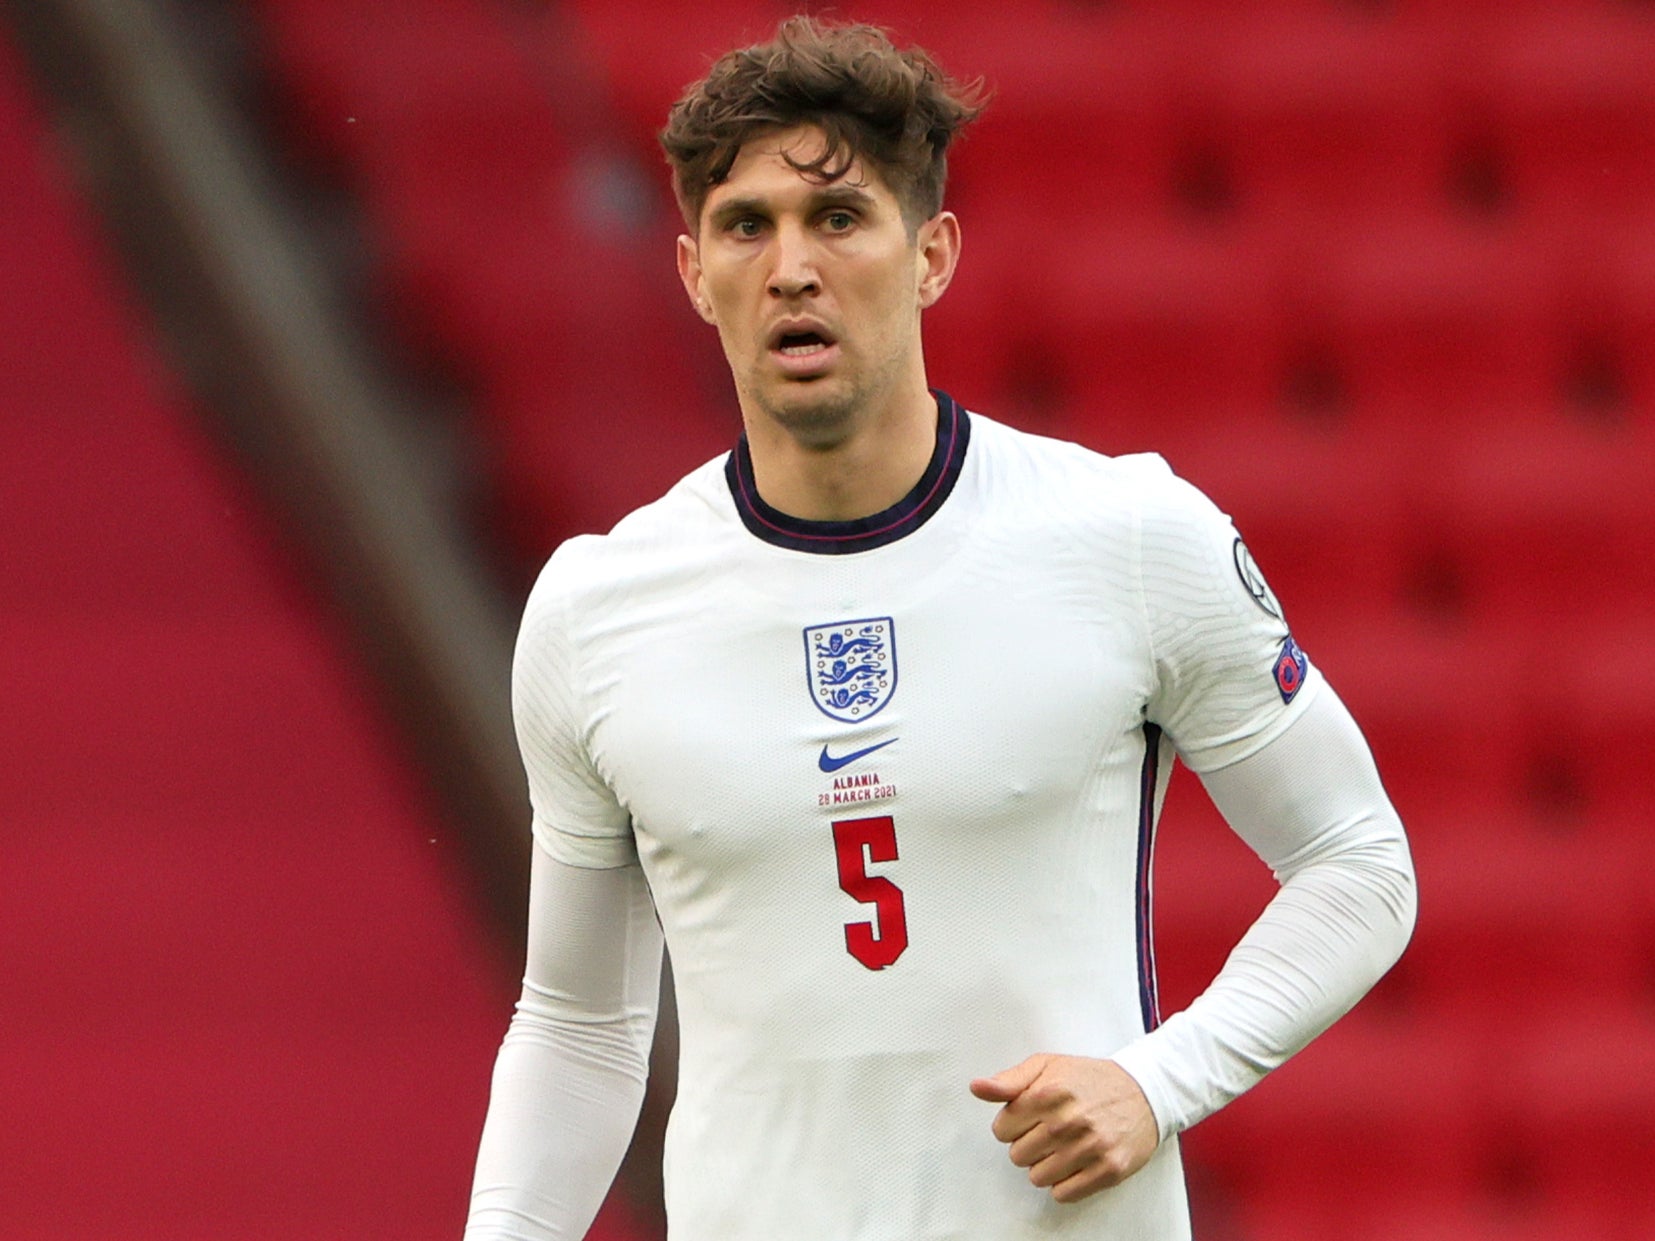  John Stones, left, and Marc Guehi, right, two English soccer players, are playing soccer.